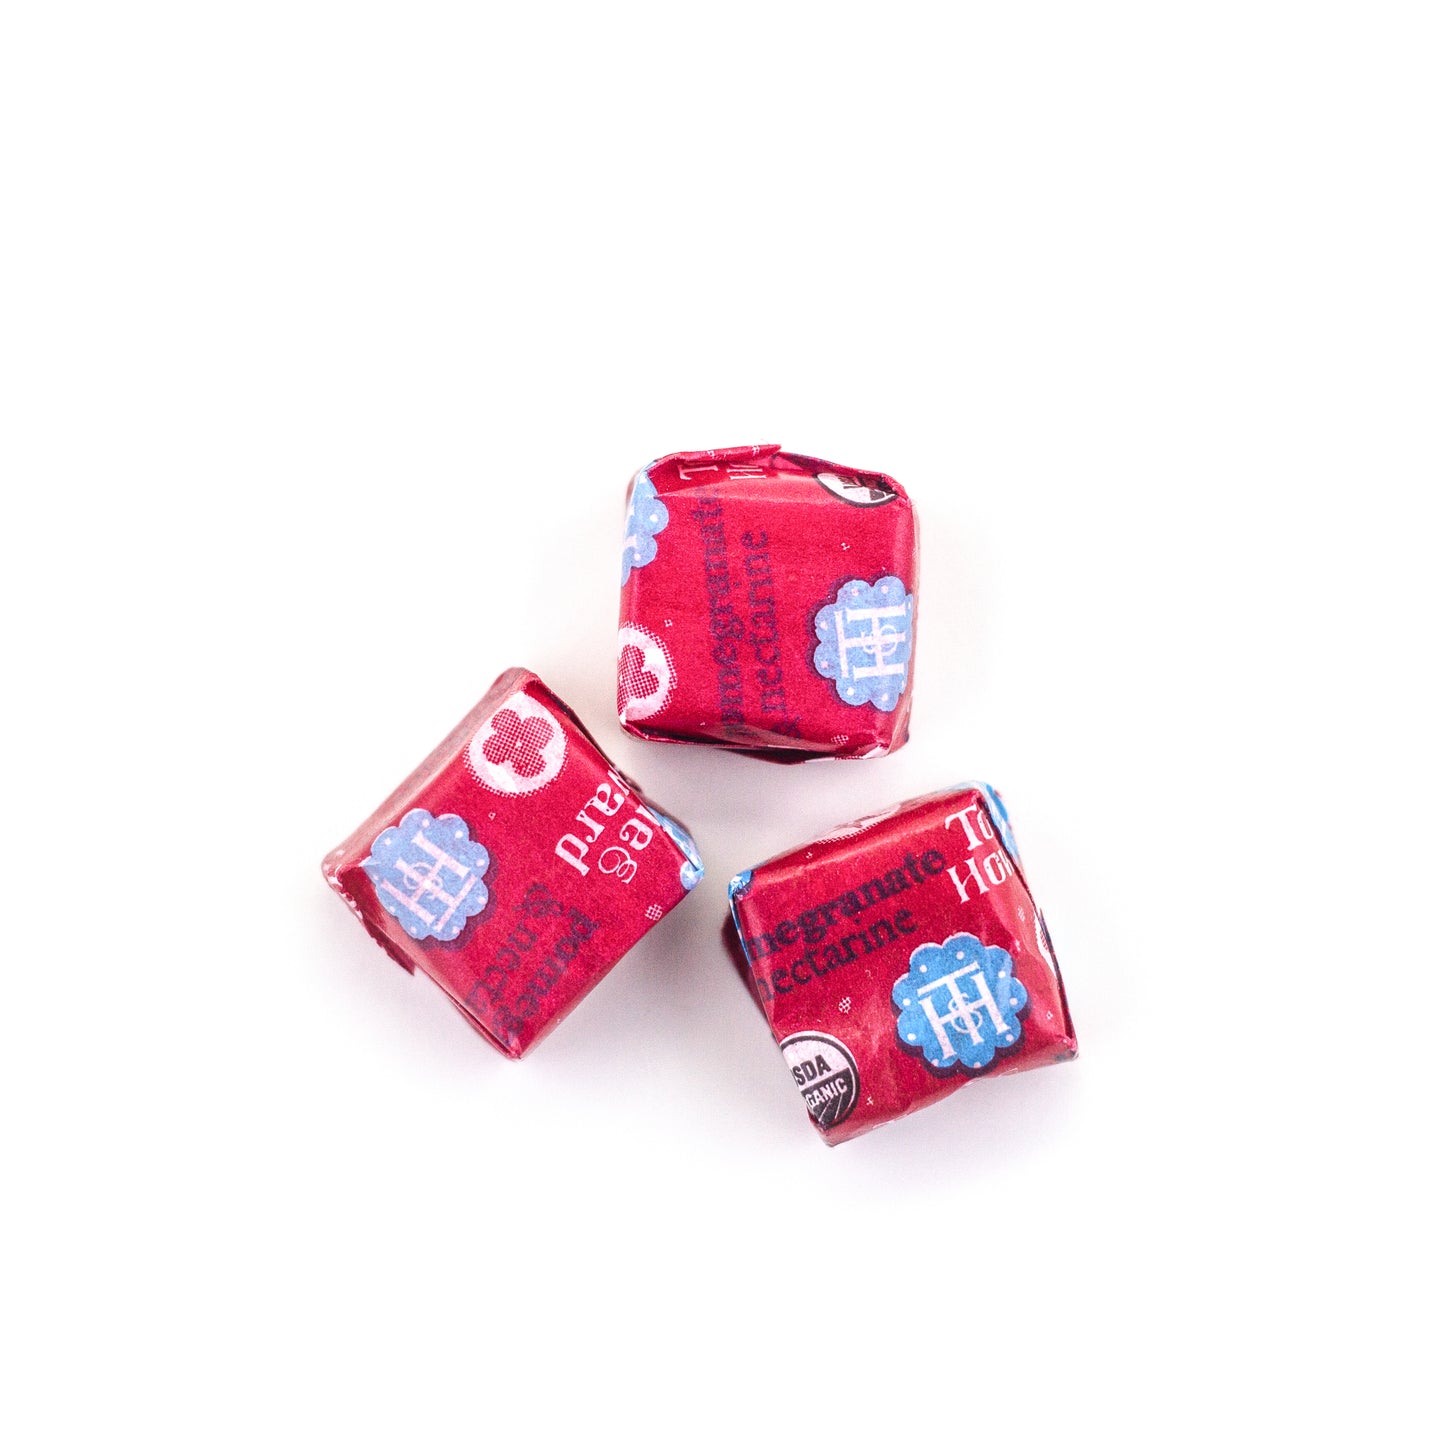 Individually wrapped Pomegranate & Nectarine organic chewy candies